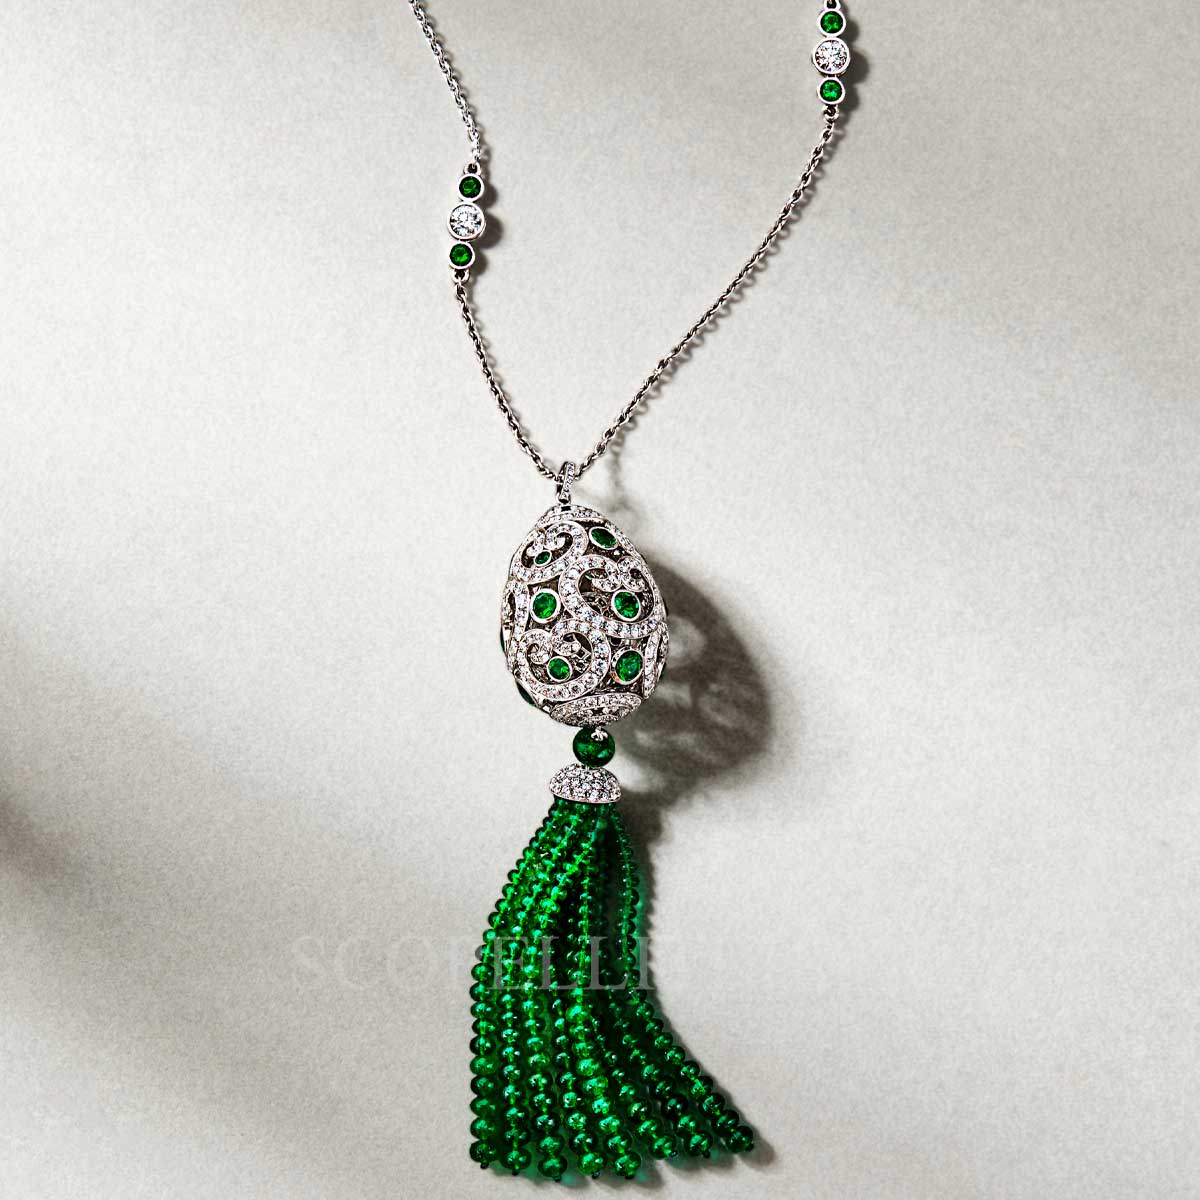 faberge imperial green pendant with emeralds tassel